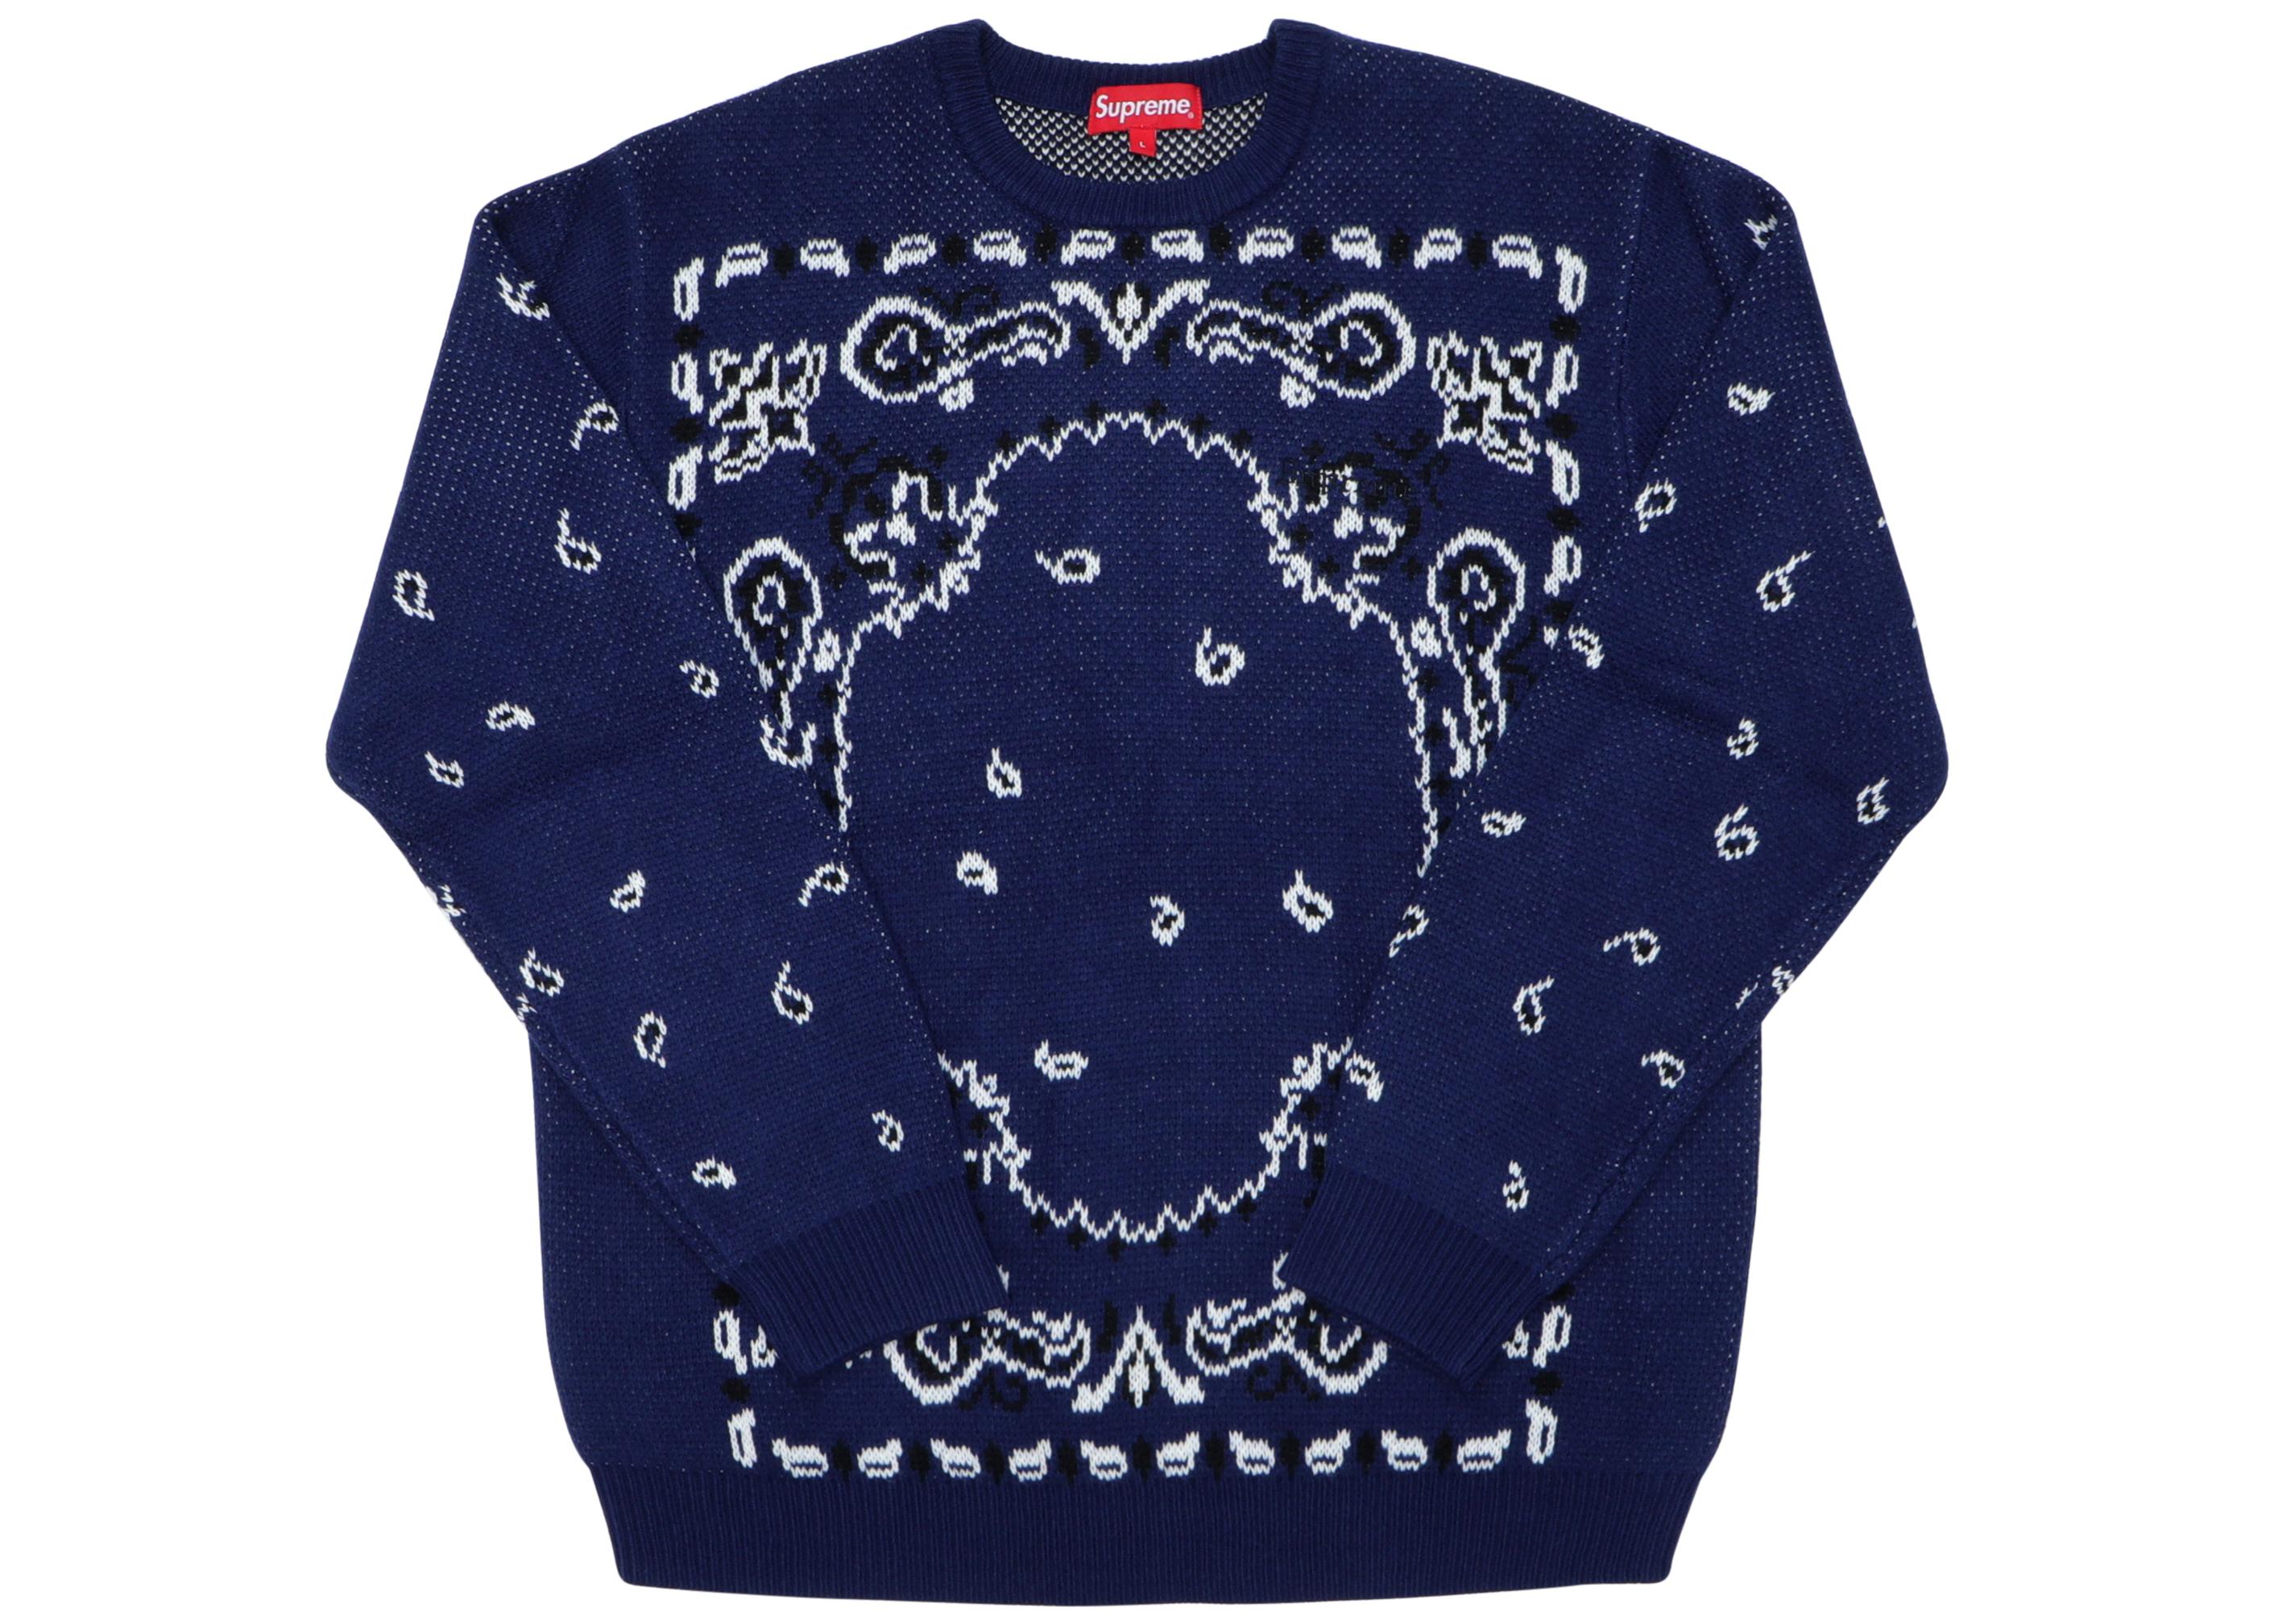 Supreme Bandana Sweater Navy in Blue for Men - Save 32% - Lyst